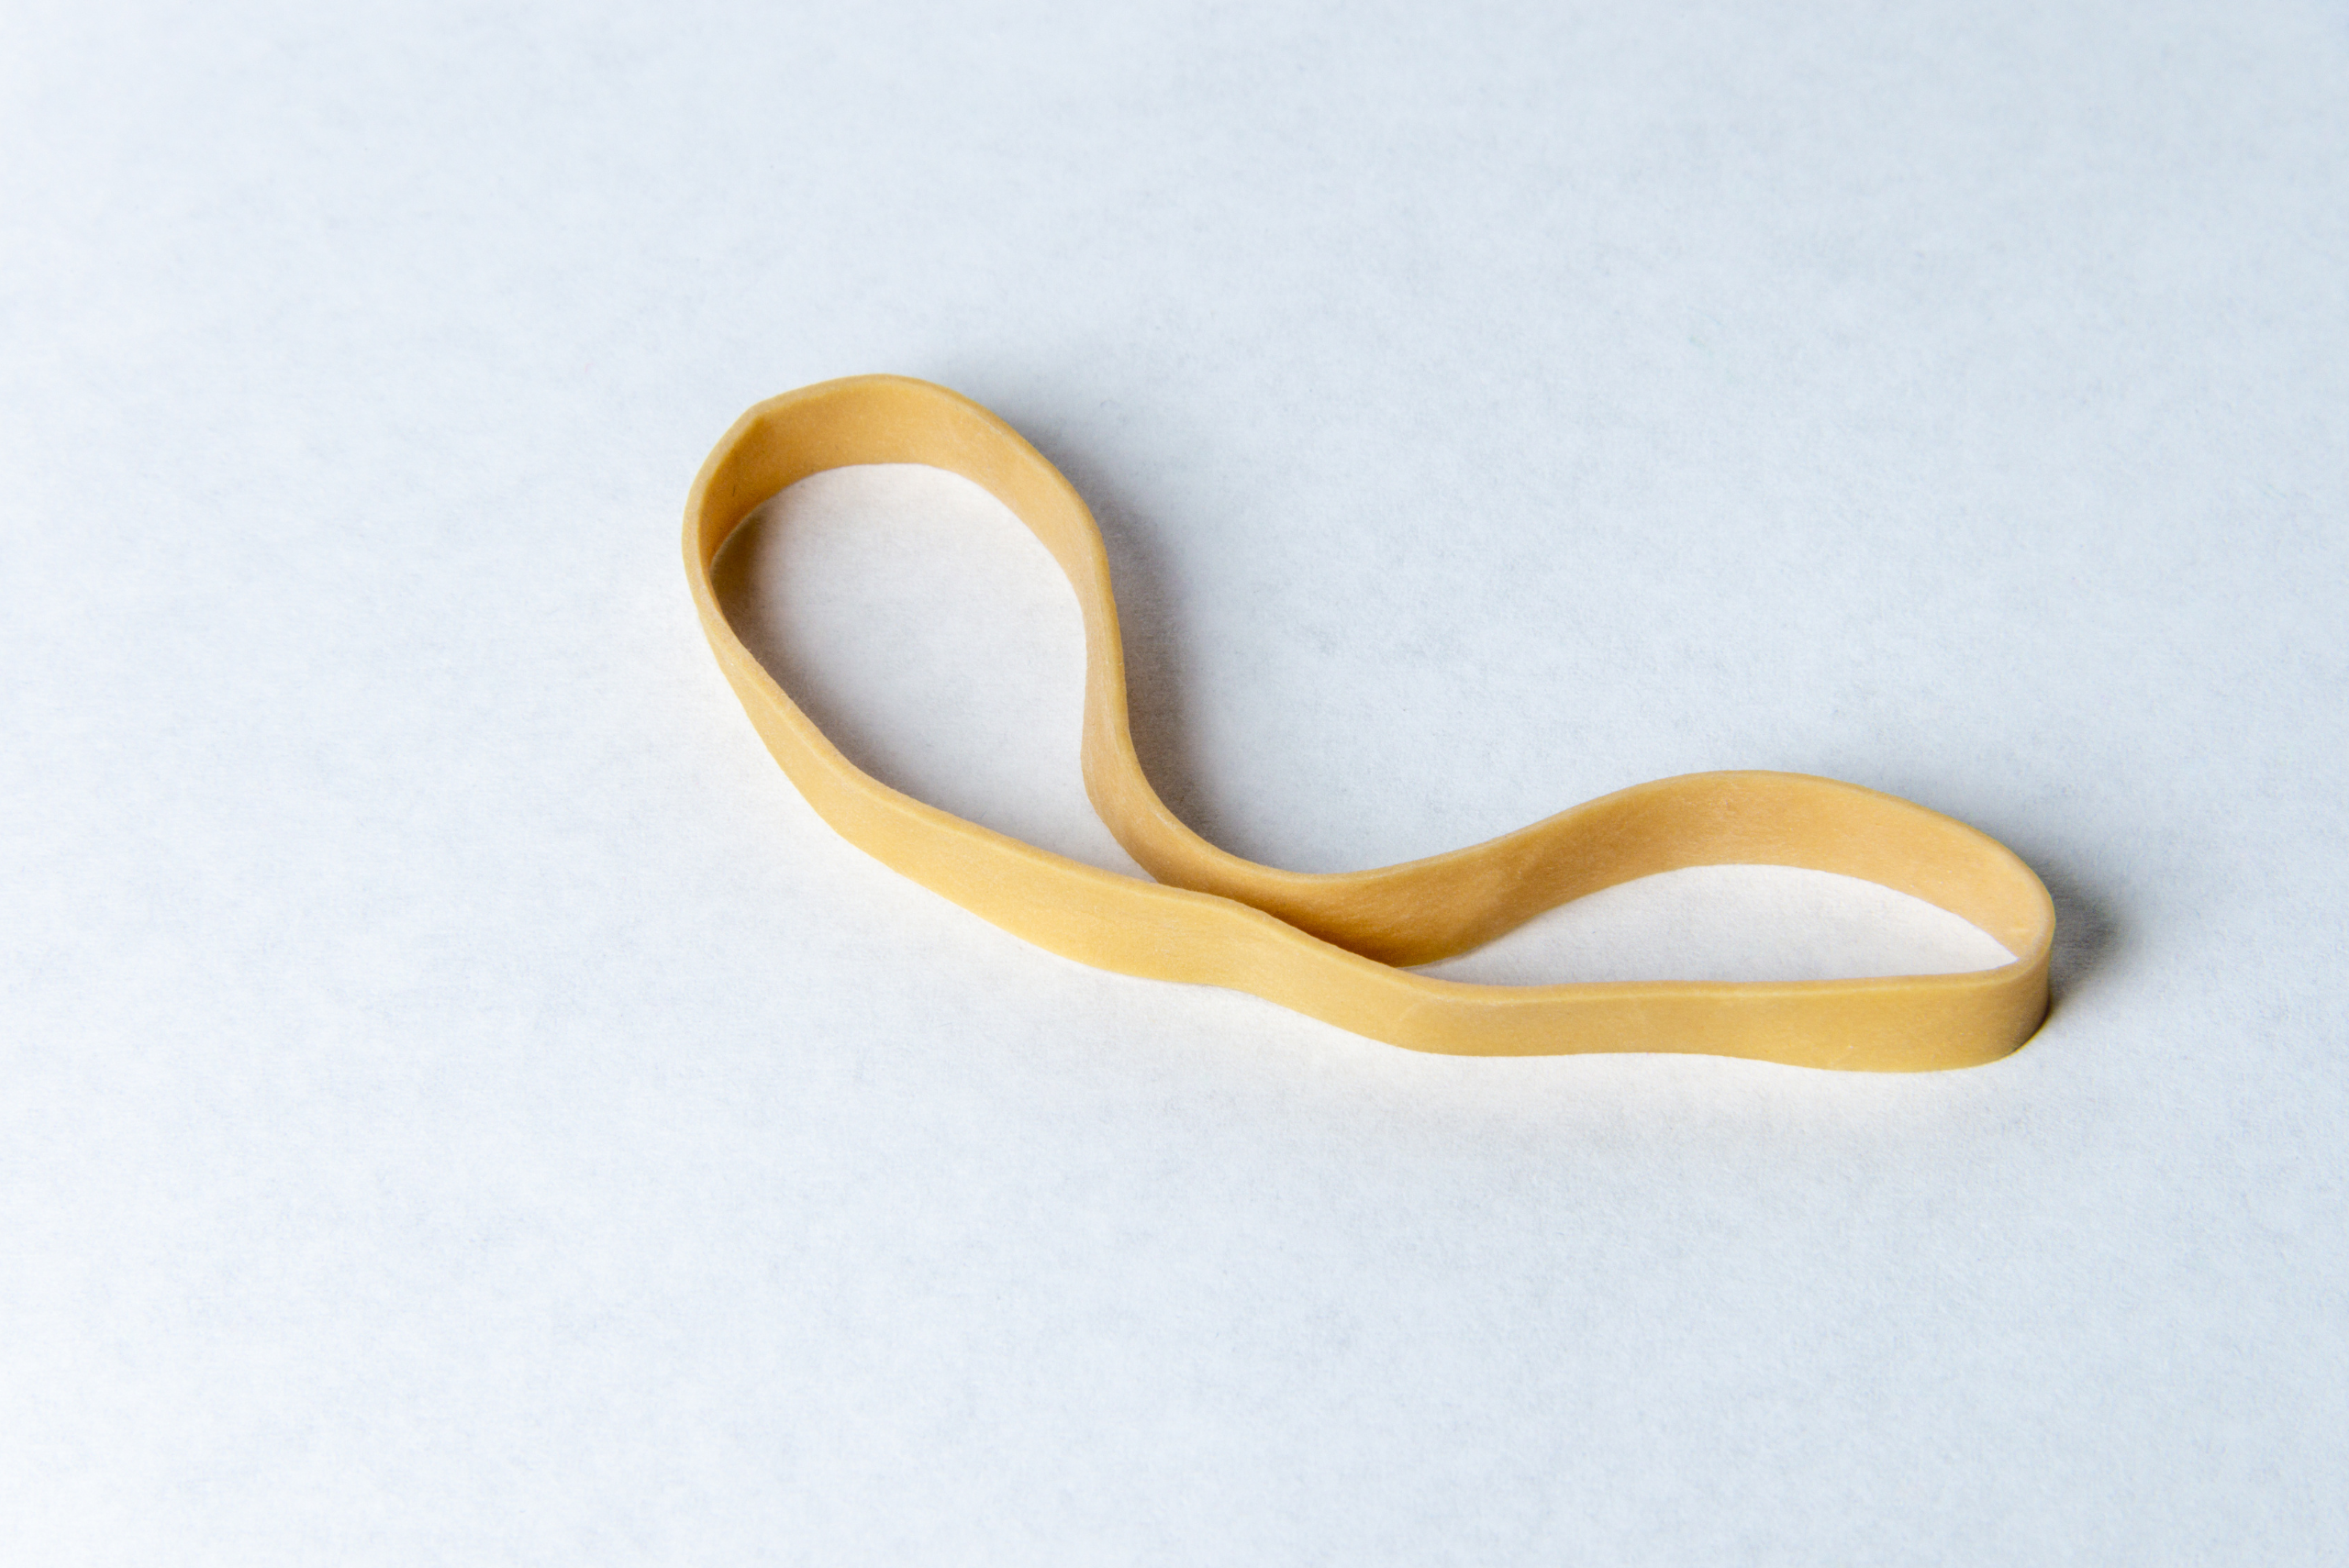 A yellow rubber band.